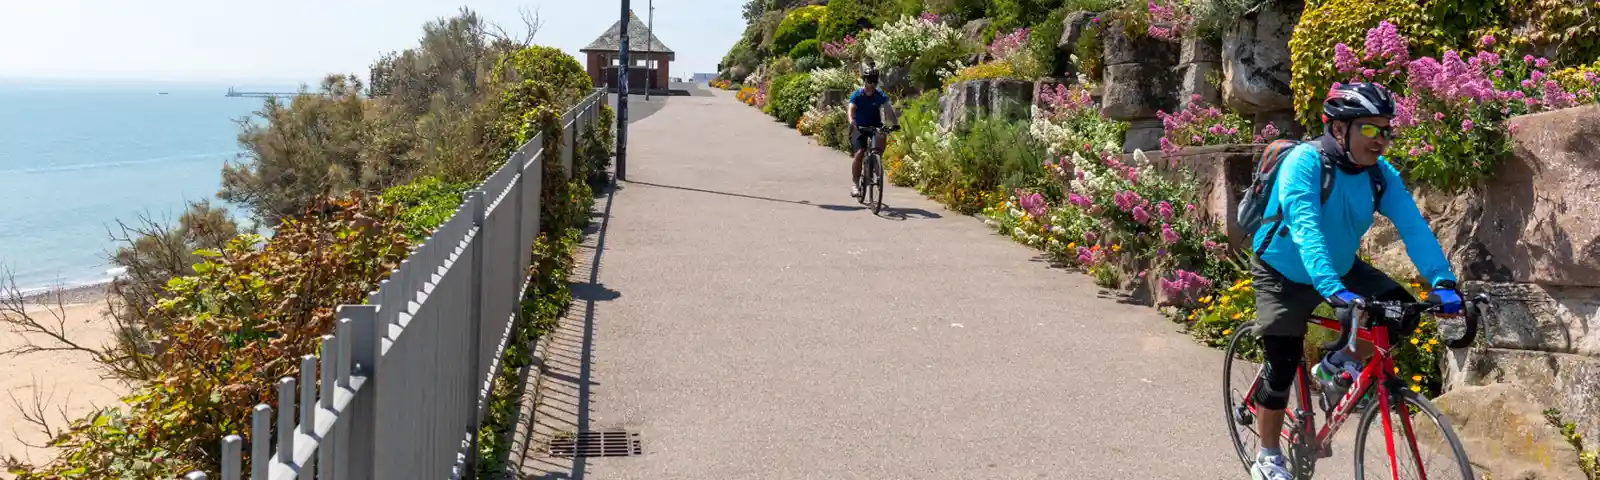 EDITED East Cliff, Ramsgate By Alex Hare 2023 Cycling Credit Tourism @ Thanet District Council MK4 9027